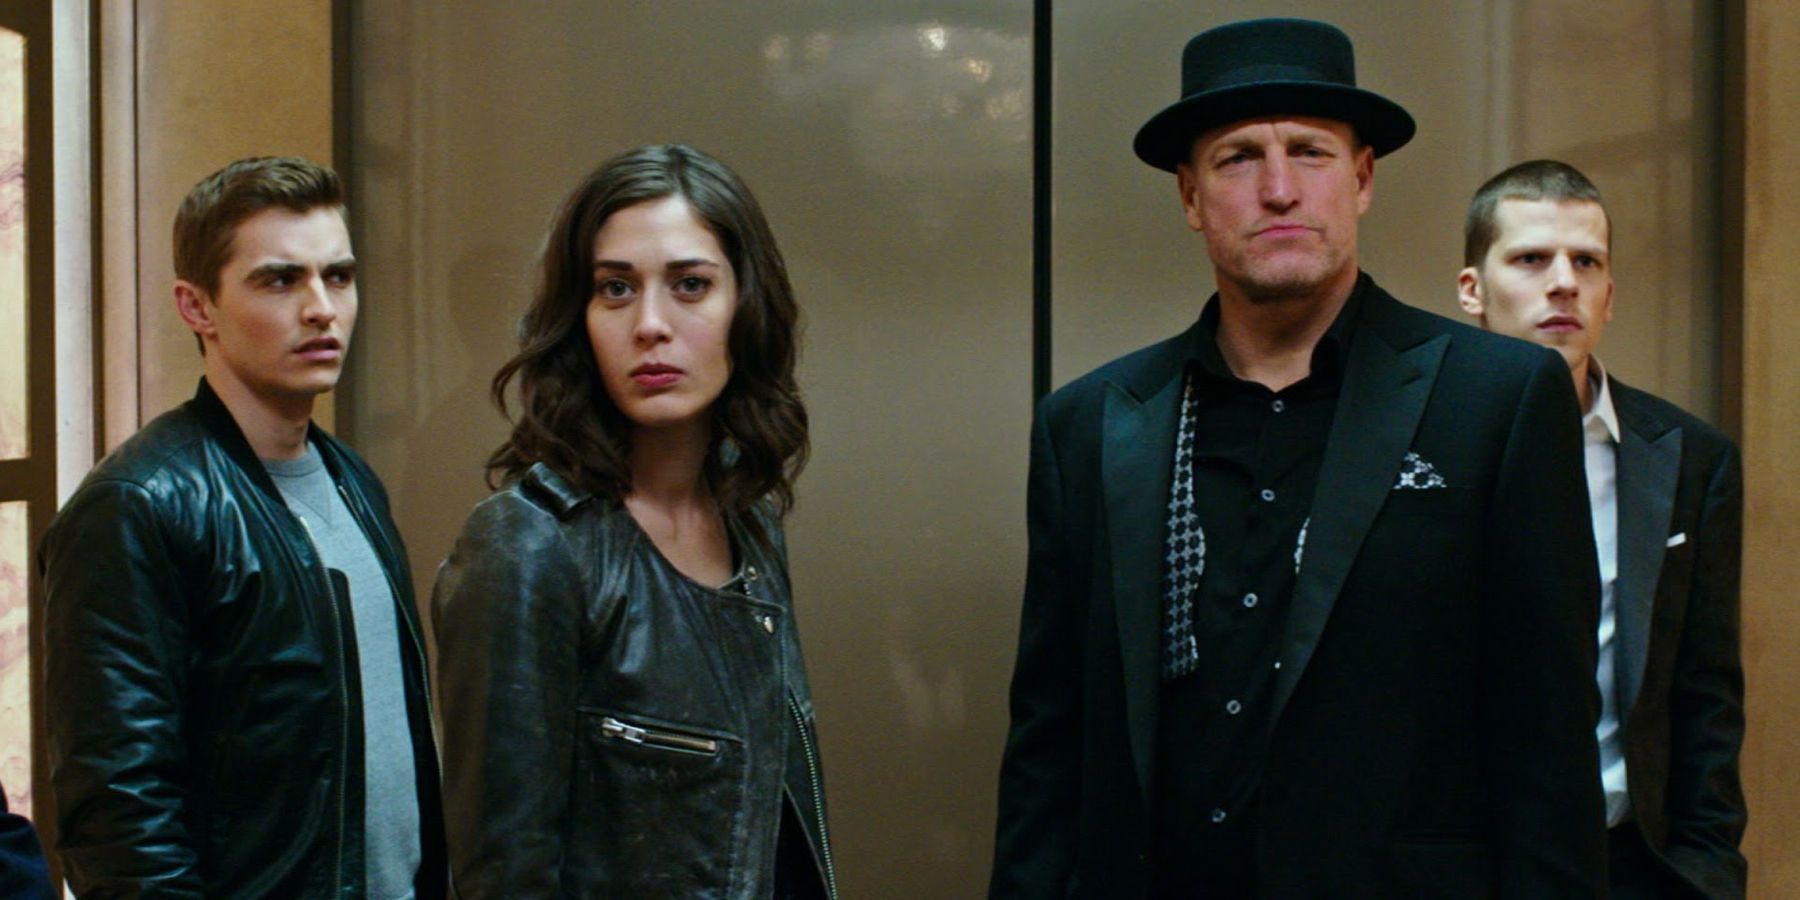 Dave Franco, Lizzy Caplan, Woody Harrelson, and Jesse Eisenberg in Now You See Me 2